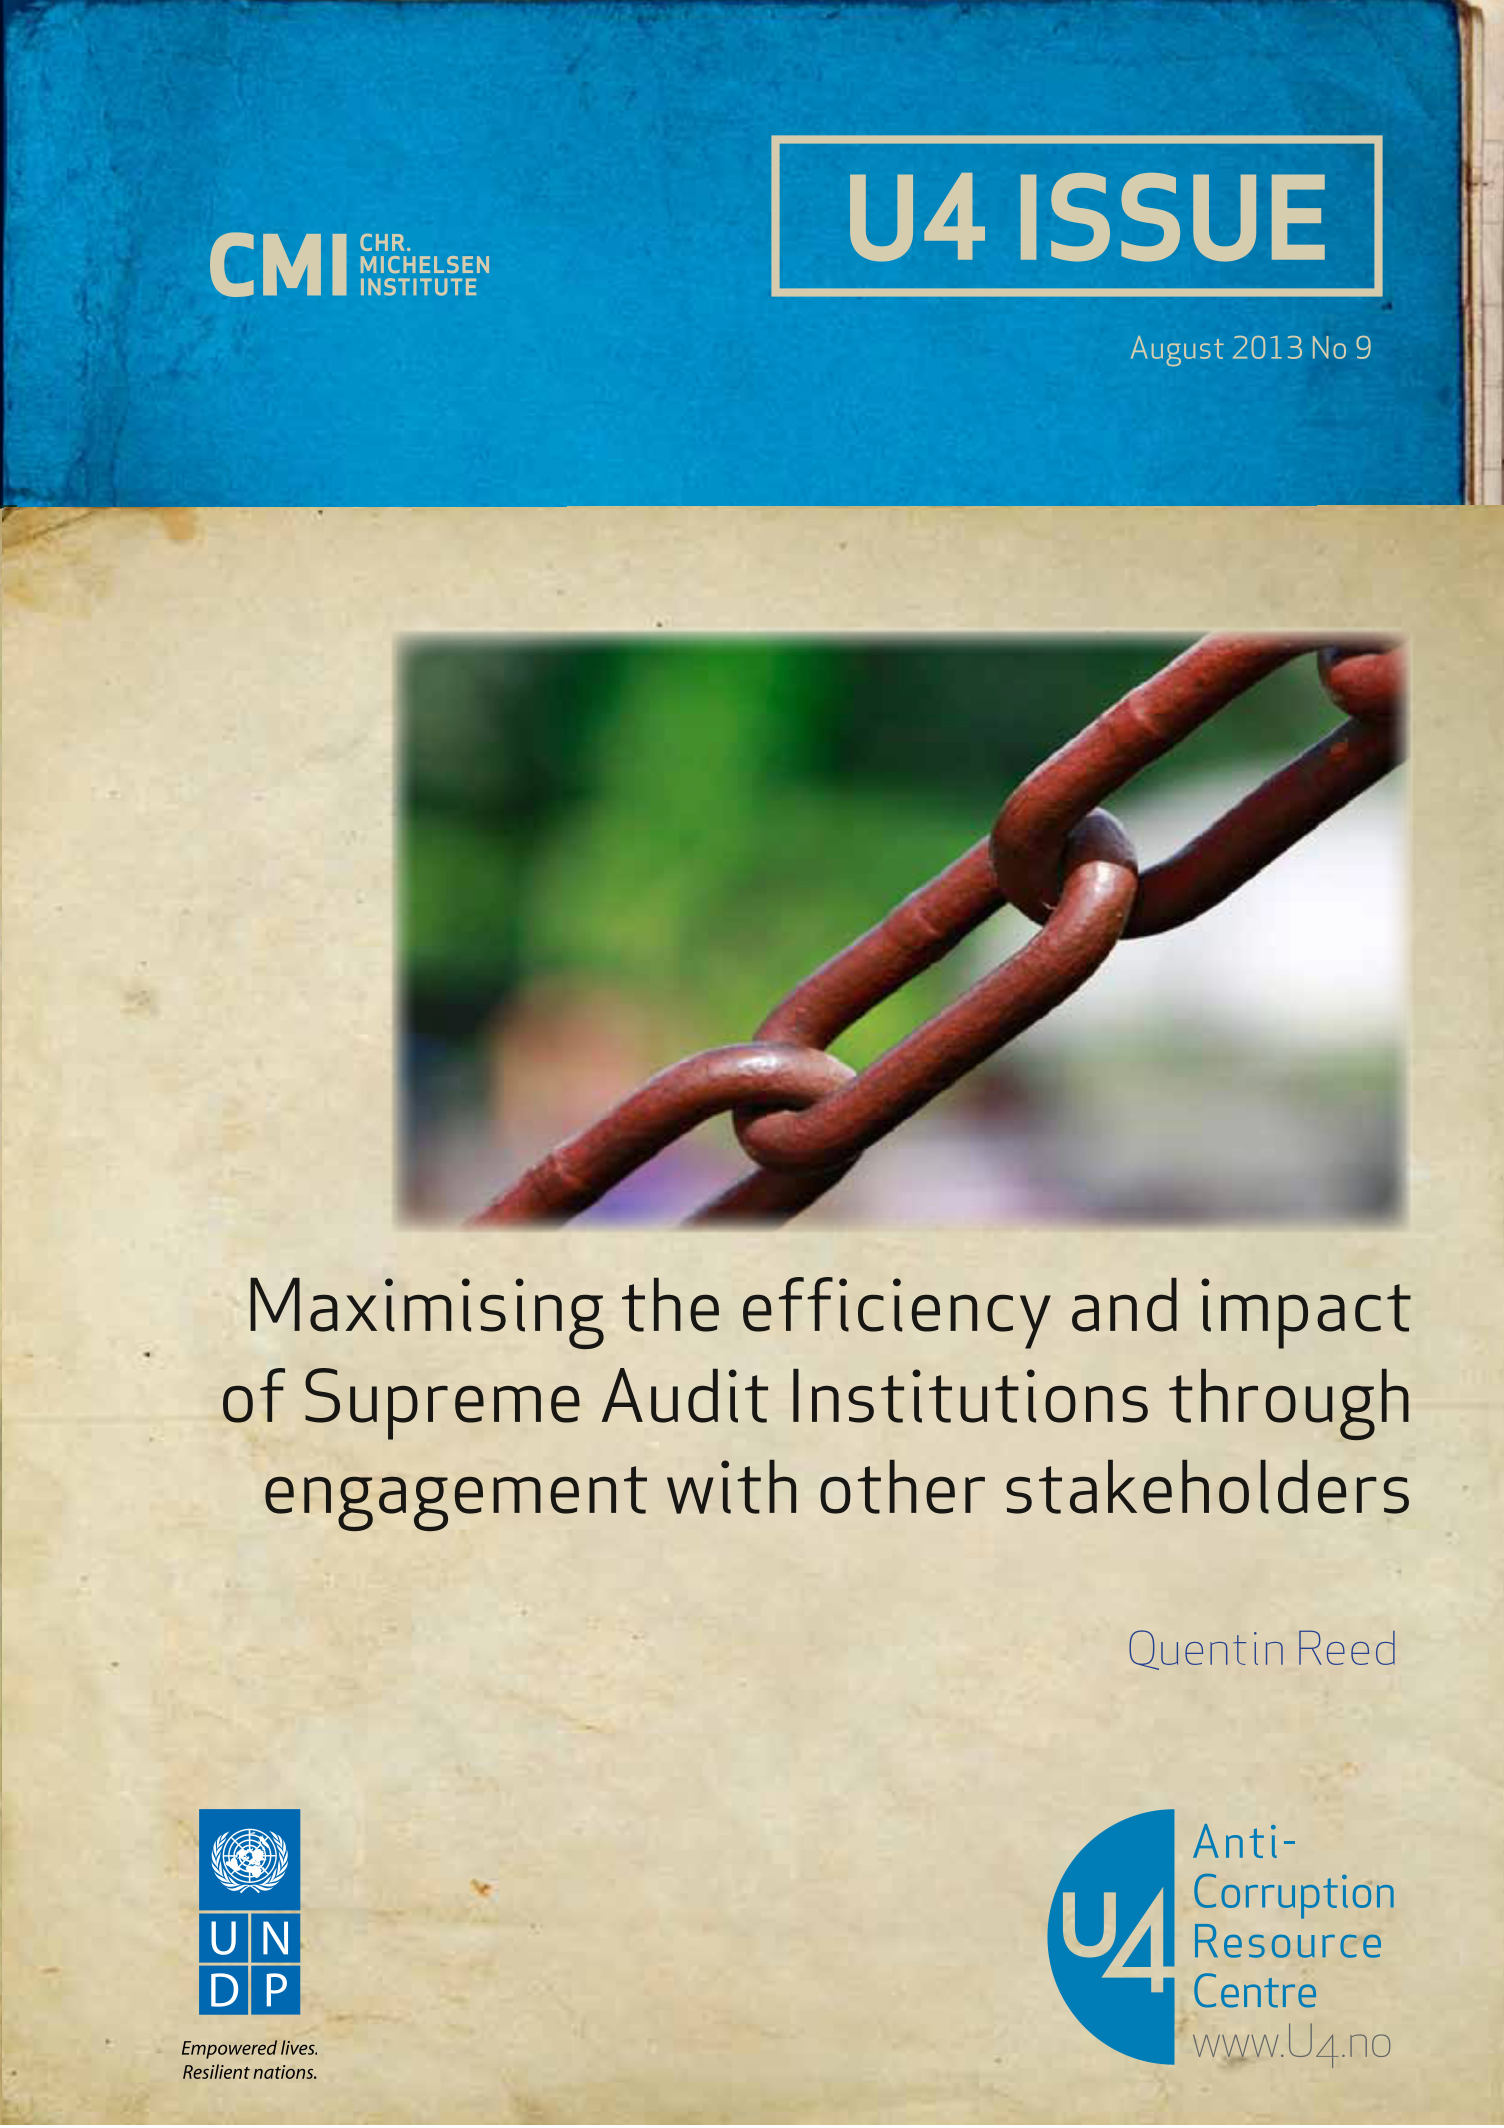 Maximising the efficiency and impact of Supreme Audit Institutions through engagement with other stakeholders